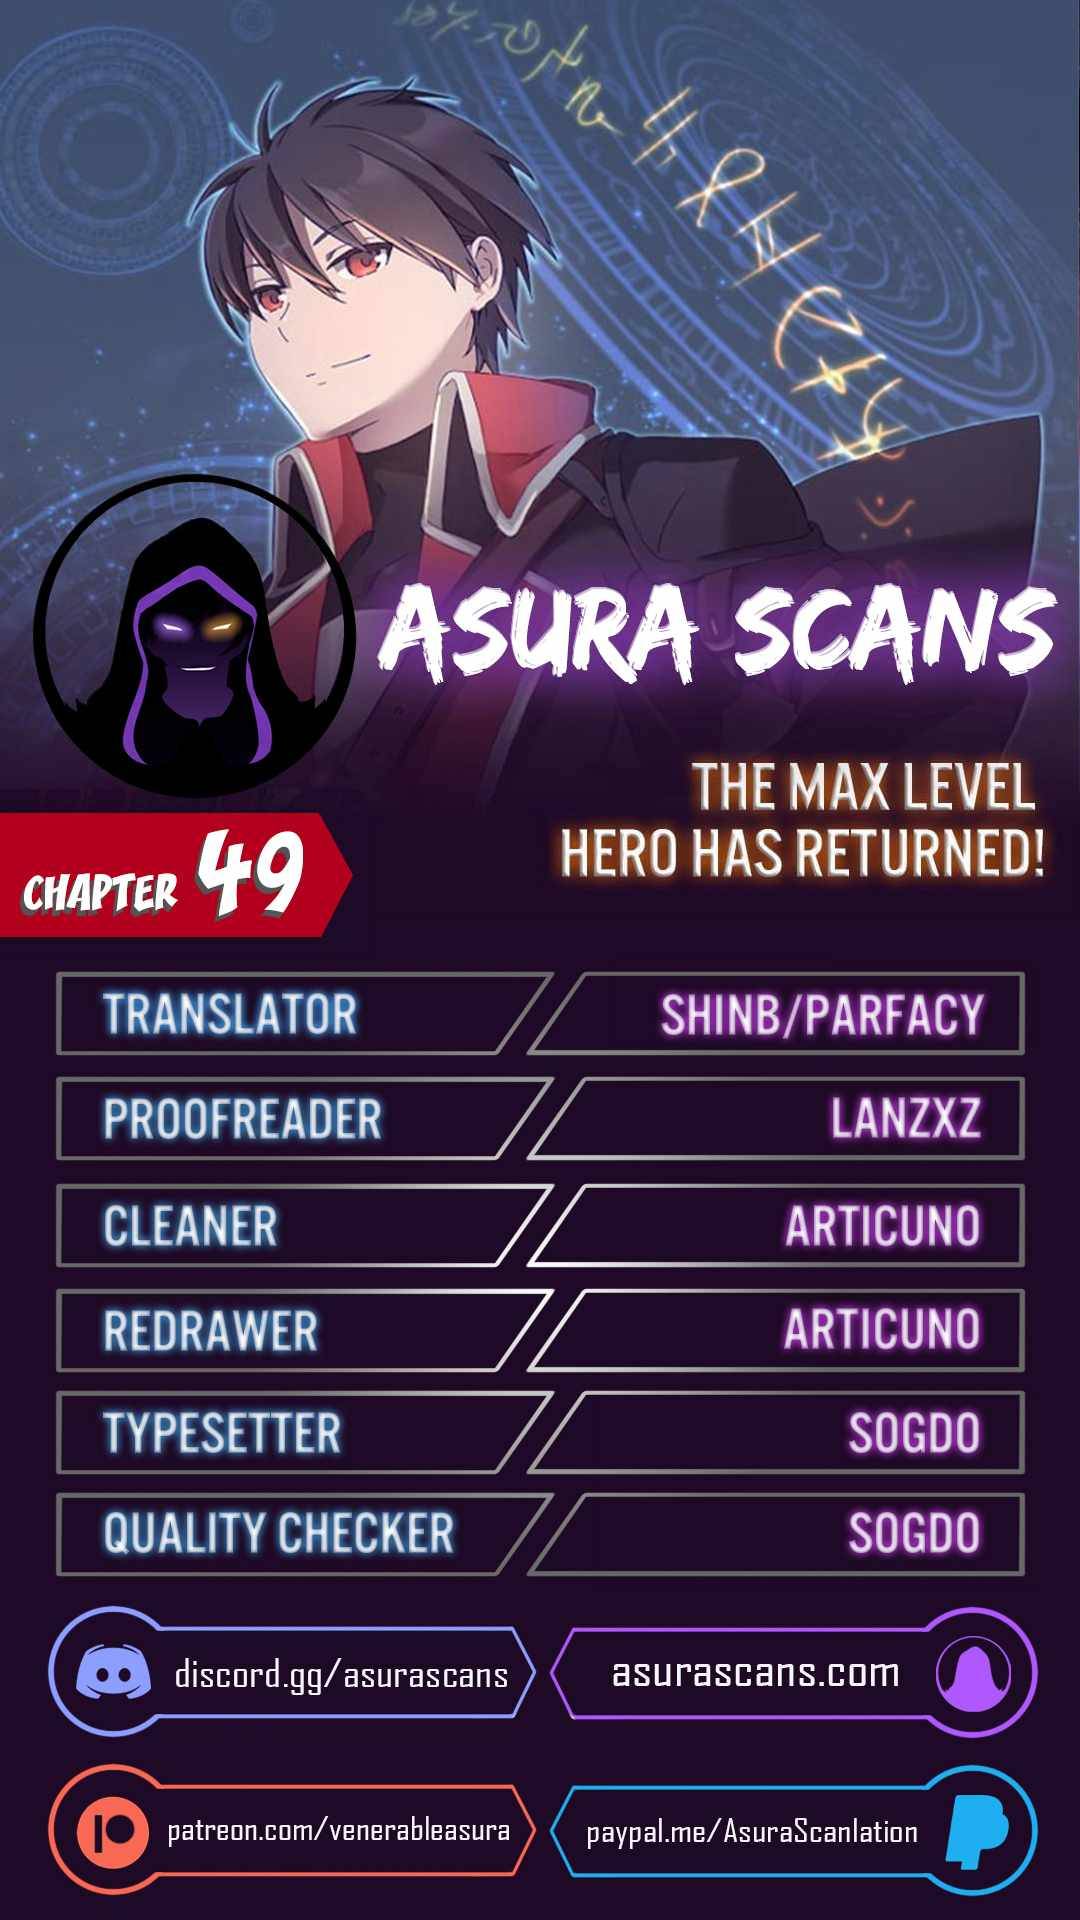 The MAX leveled hero will return! Chapter 49